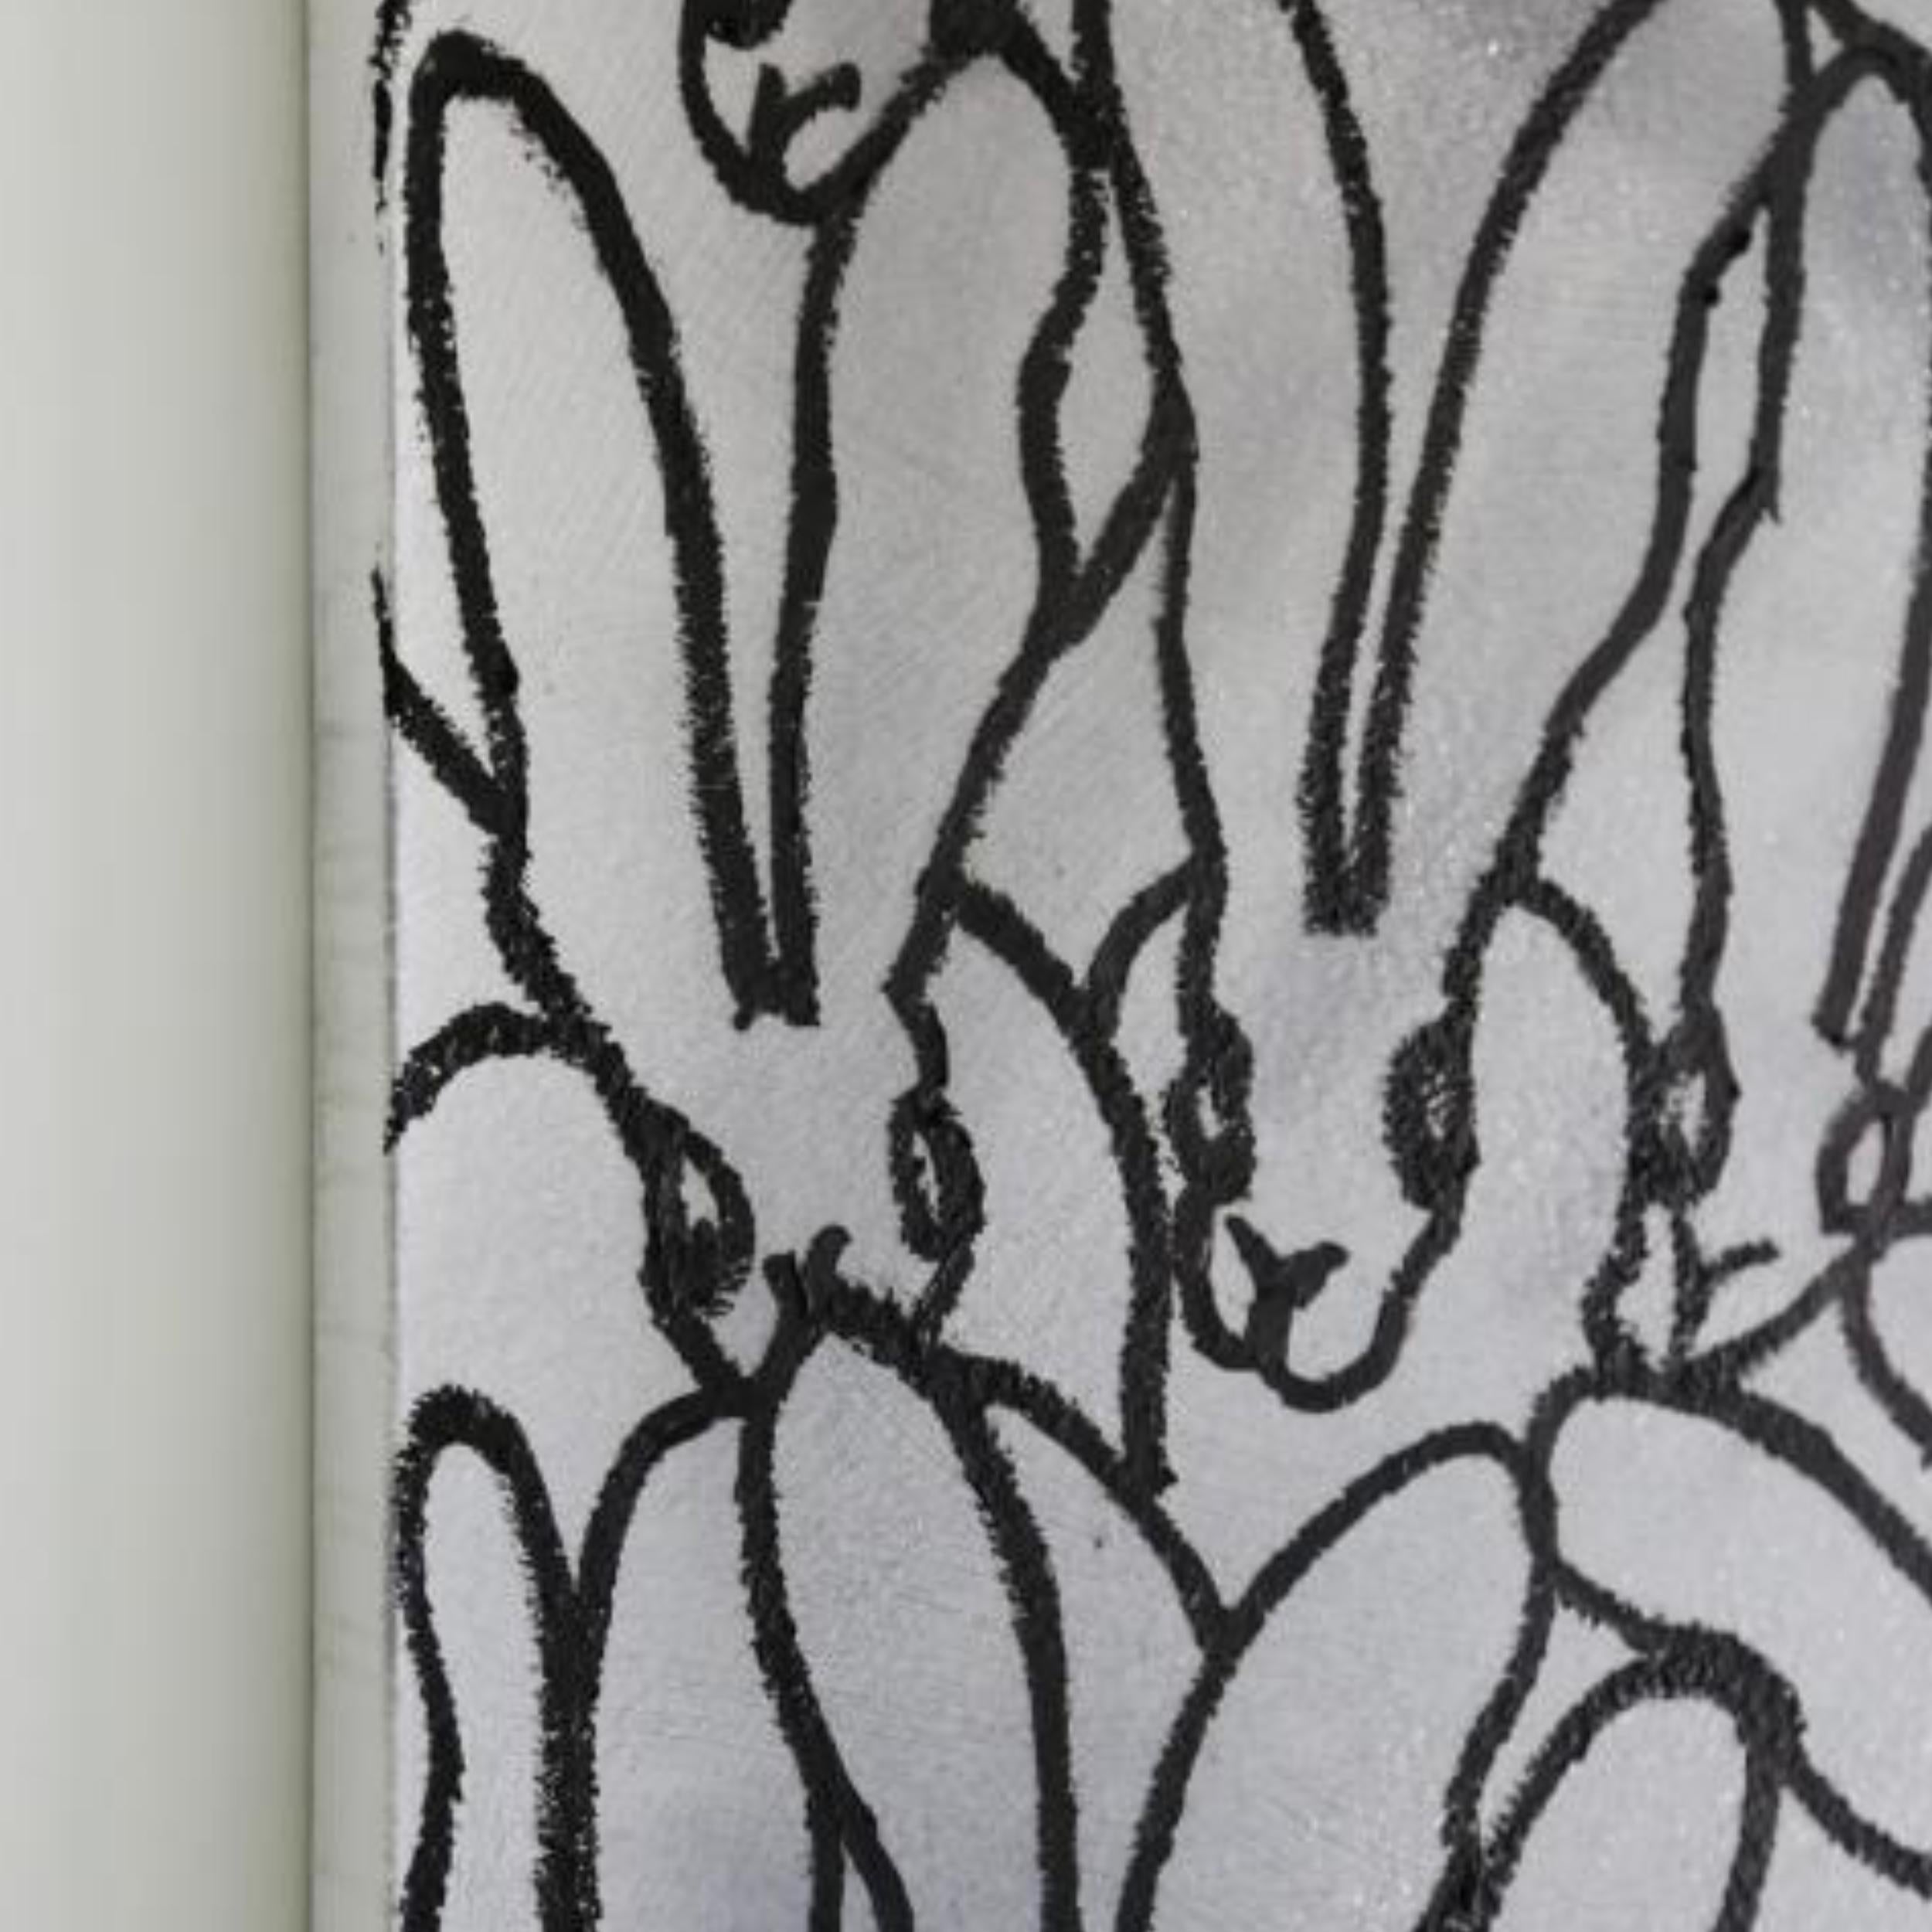 UNTITLED White Bunnies - Painting by Hunt Slonem